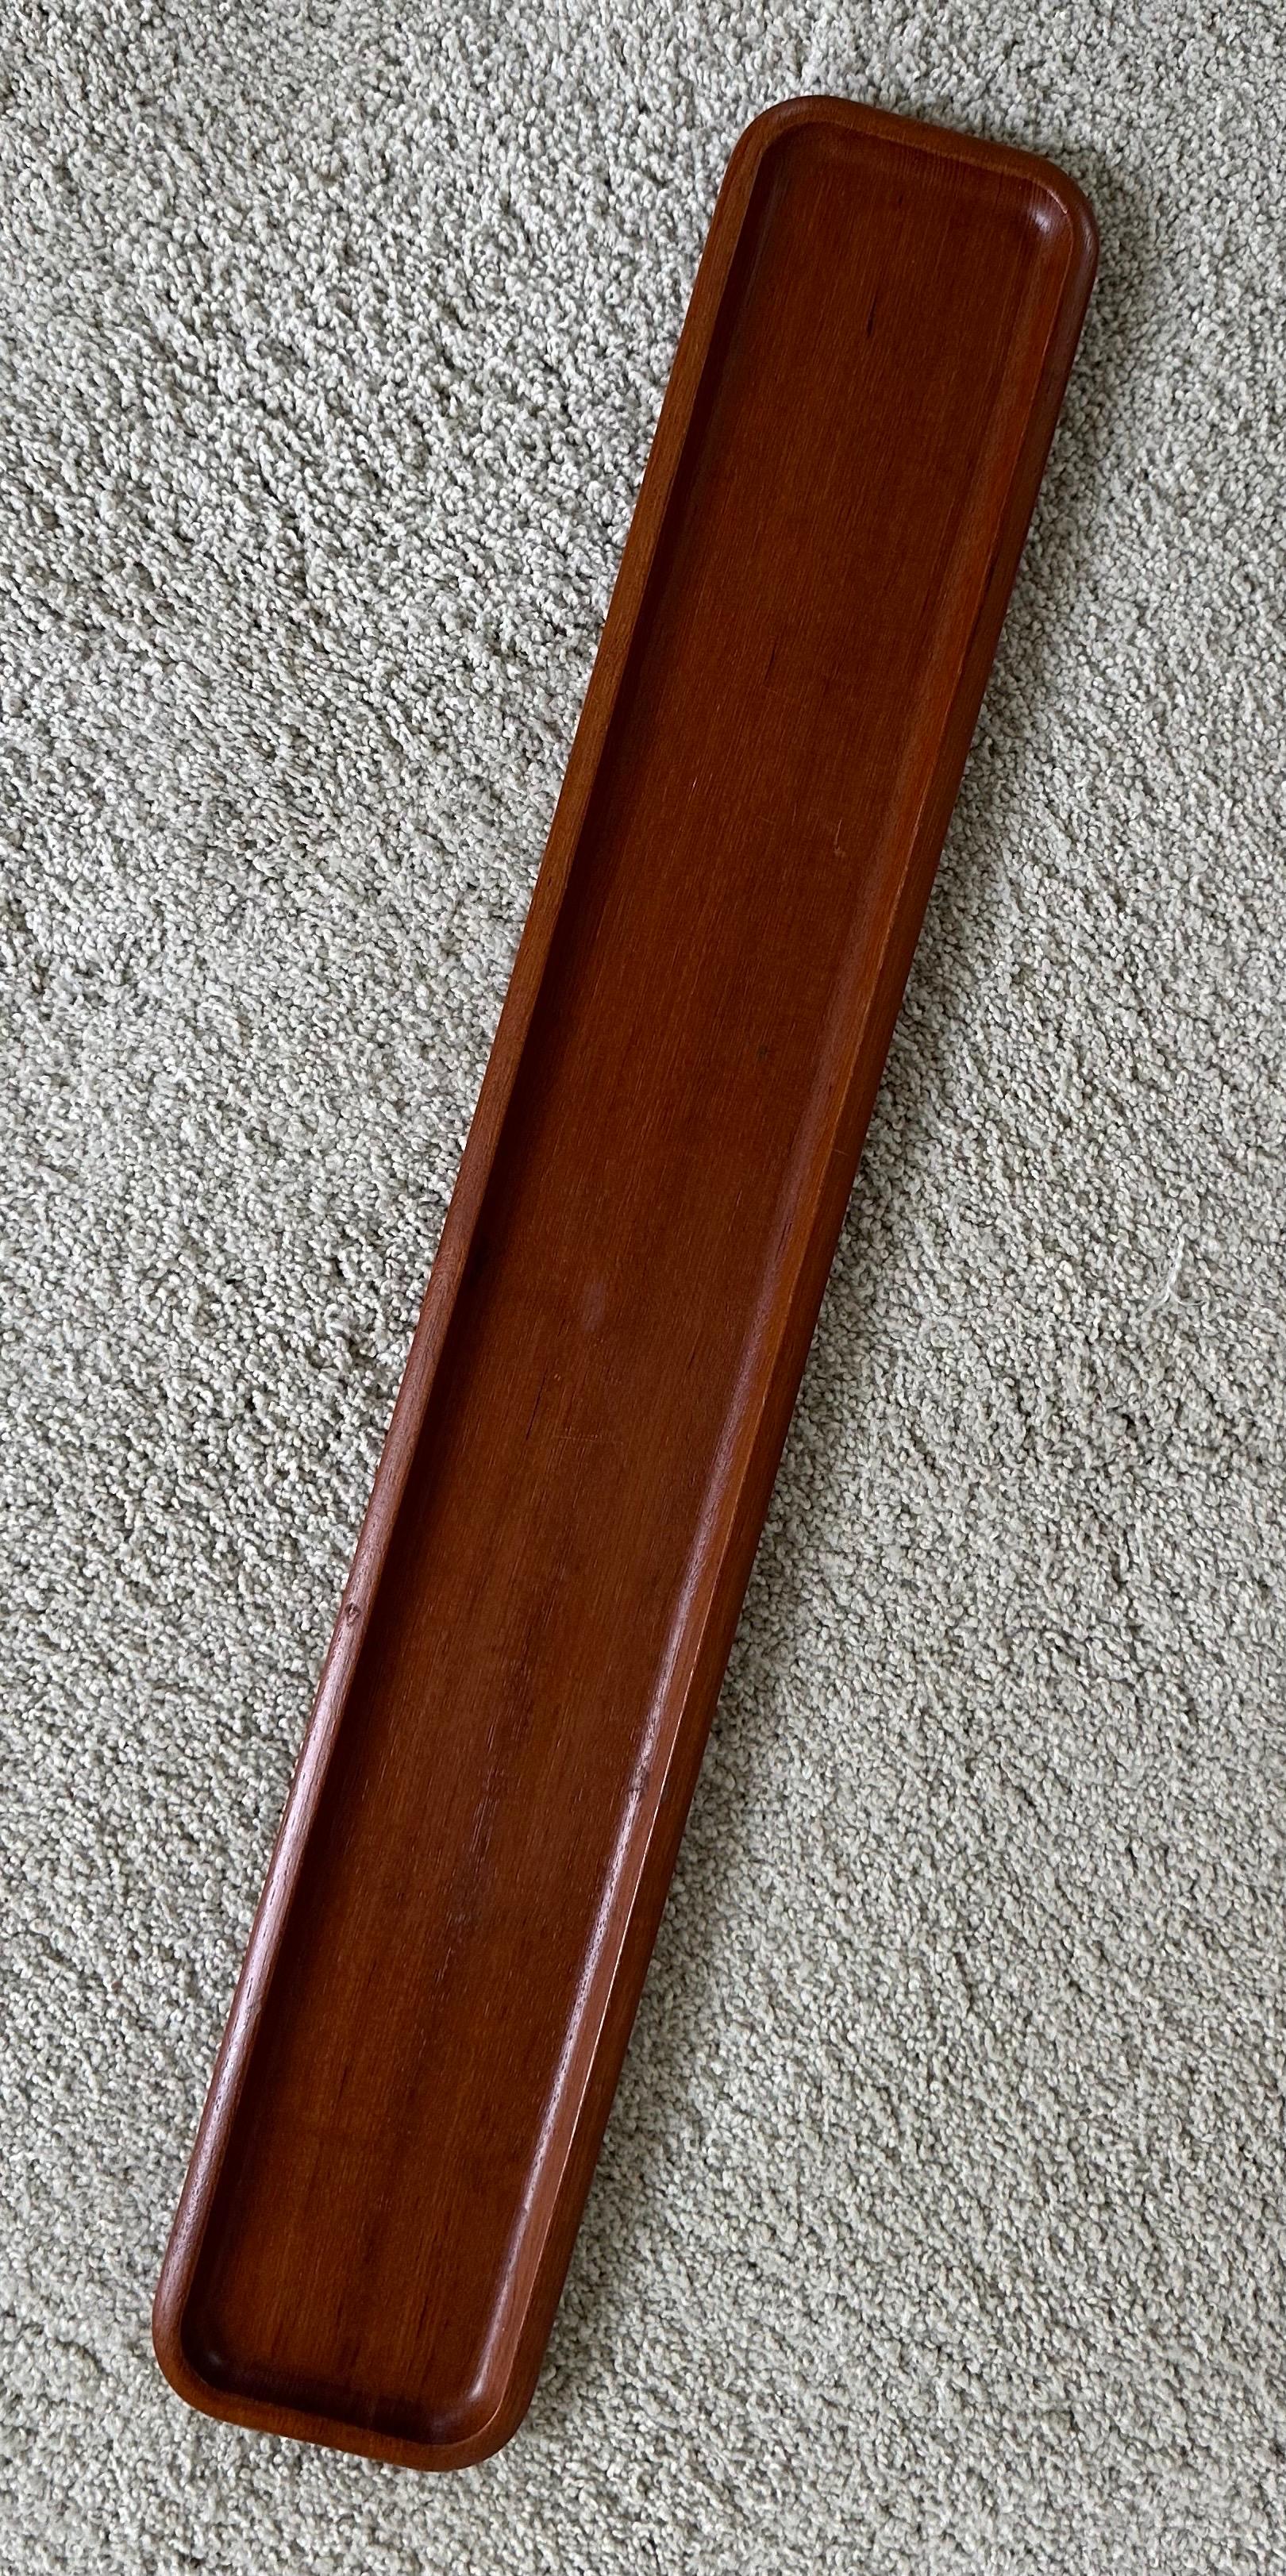 A very hard to find Scandinavian modern solid teak long tray by Karl Holmberg for Akta, circa 1950s.  The tray is in great vintage condition and measures a sleek 23.75